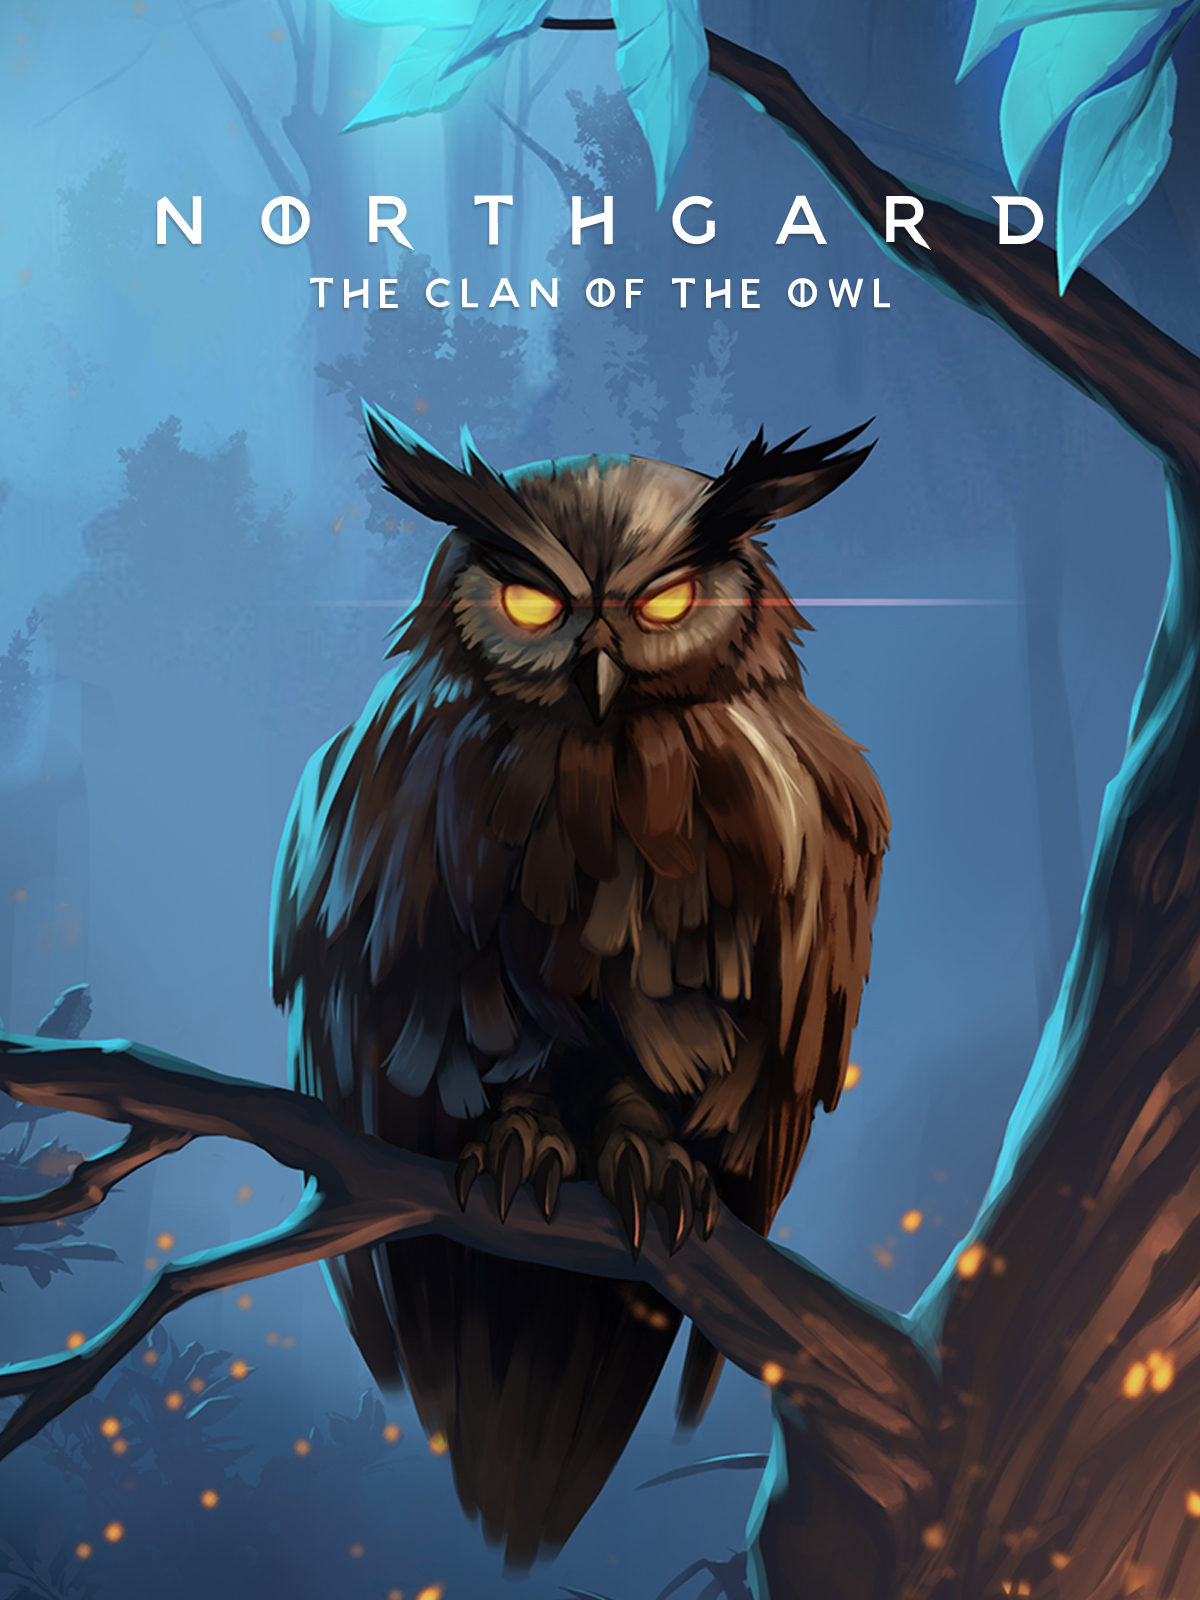 Northgard - Vordr, Clan of the Owl